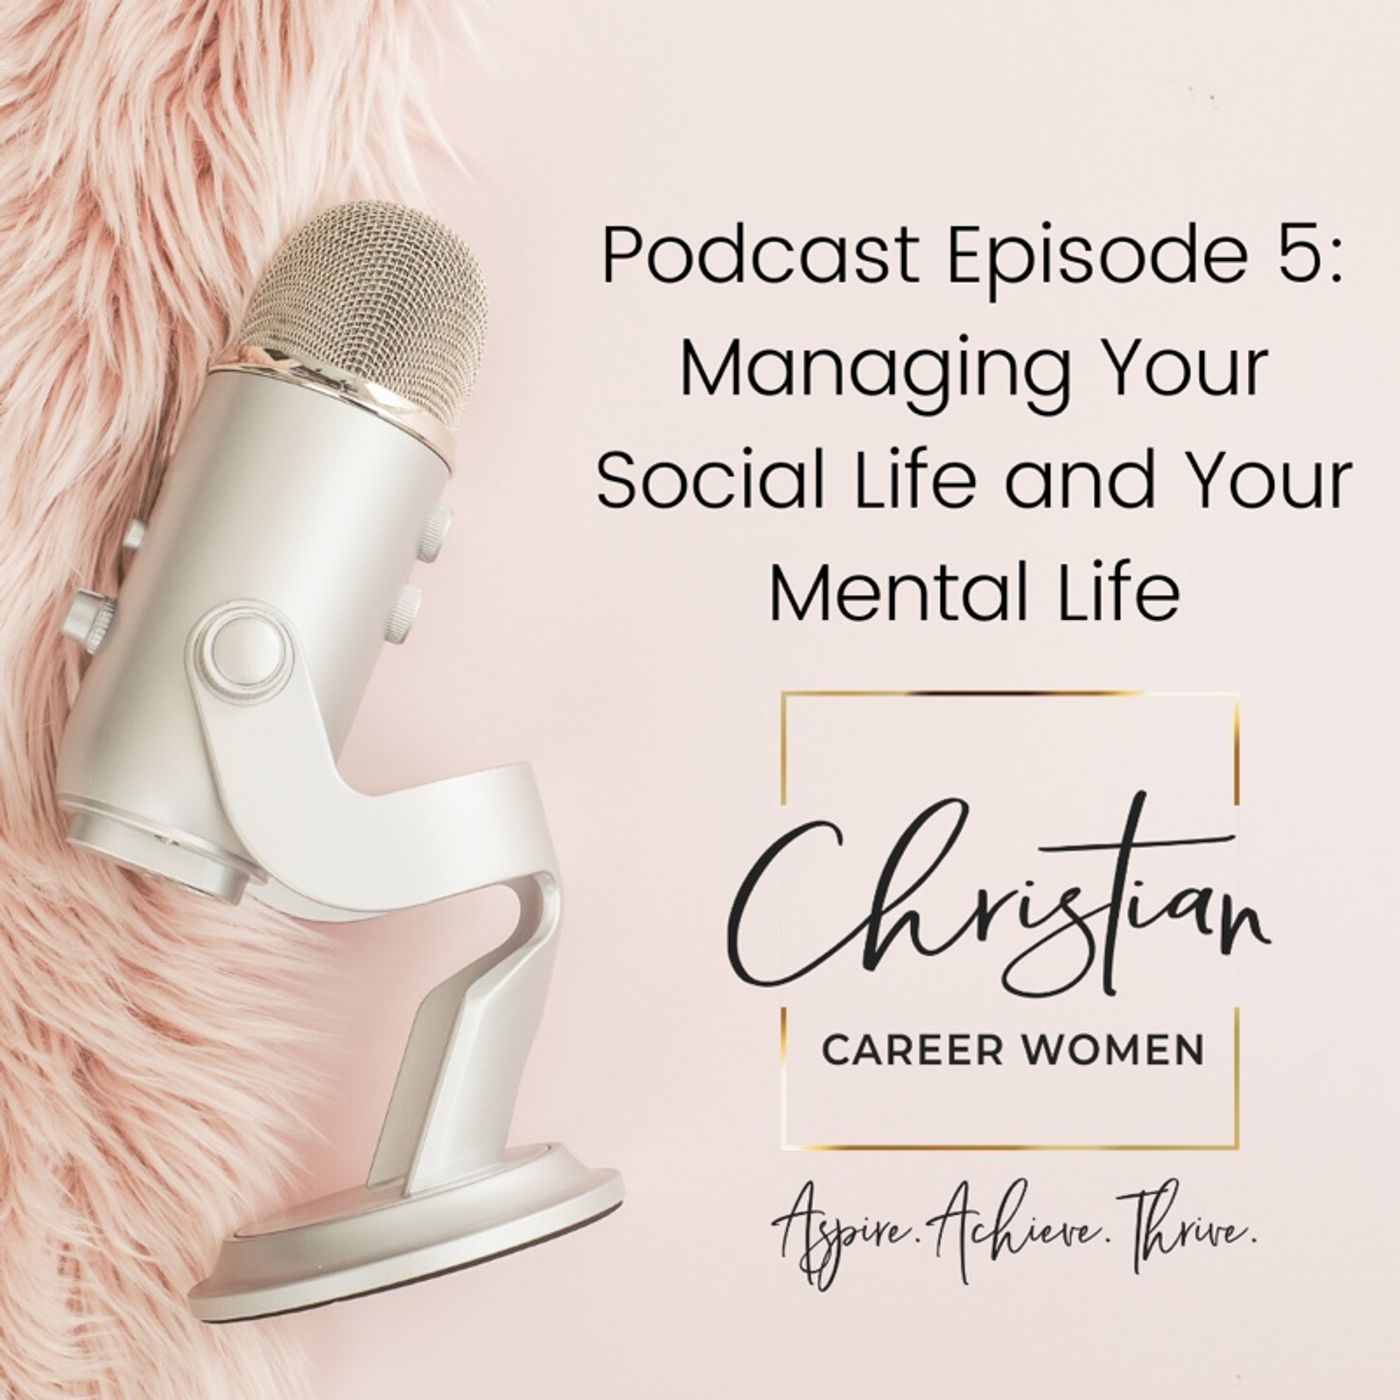 Episode 5: Managing Your Social Life and Your Mental Life